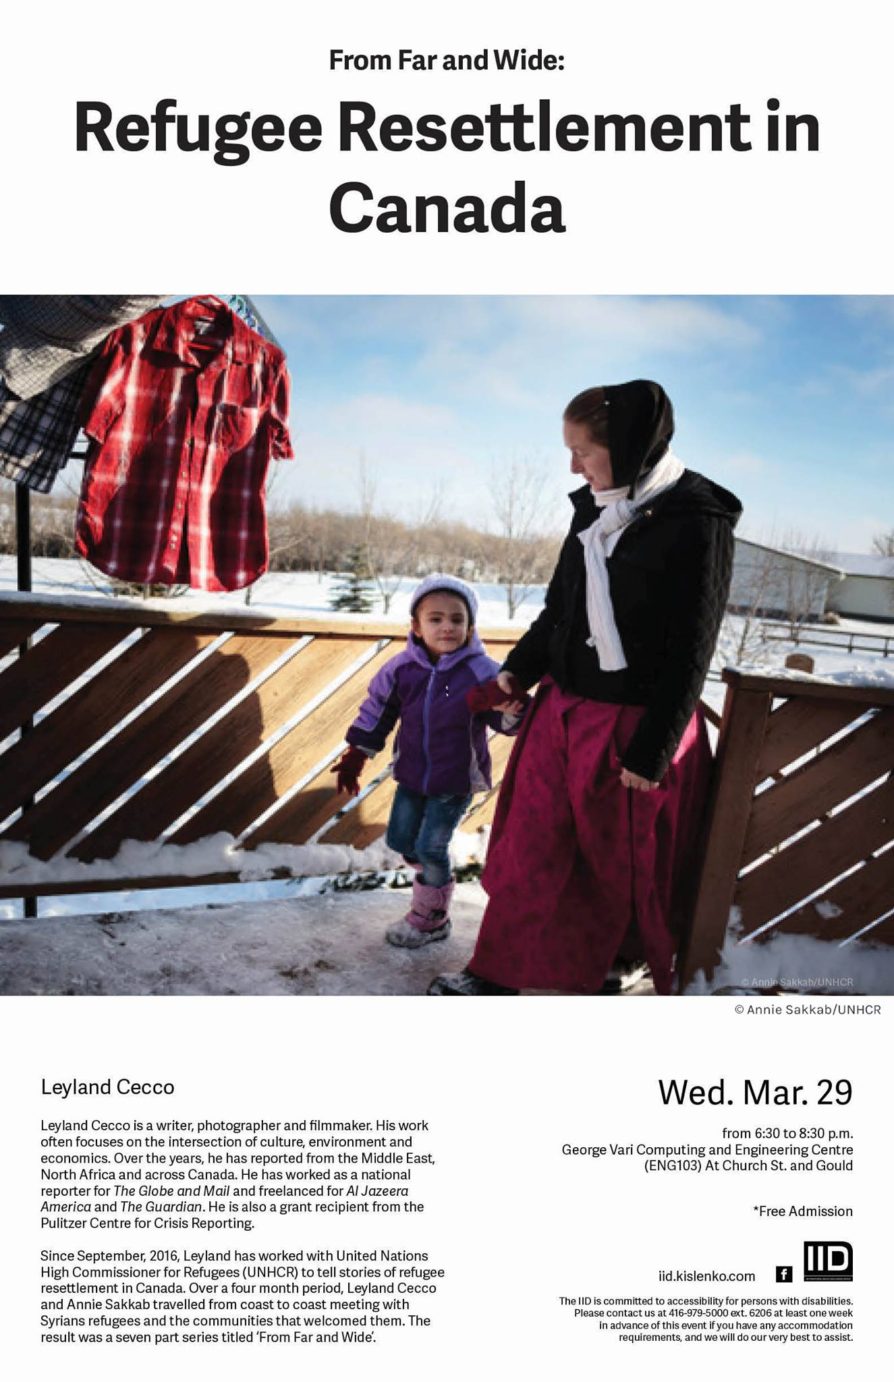 From Far and Wide: Refugee Resettlement in Canada—Wednesday, March 29th, 2017